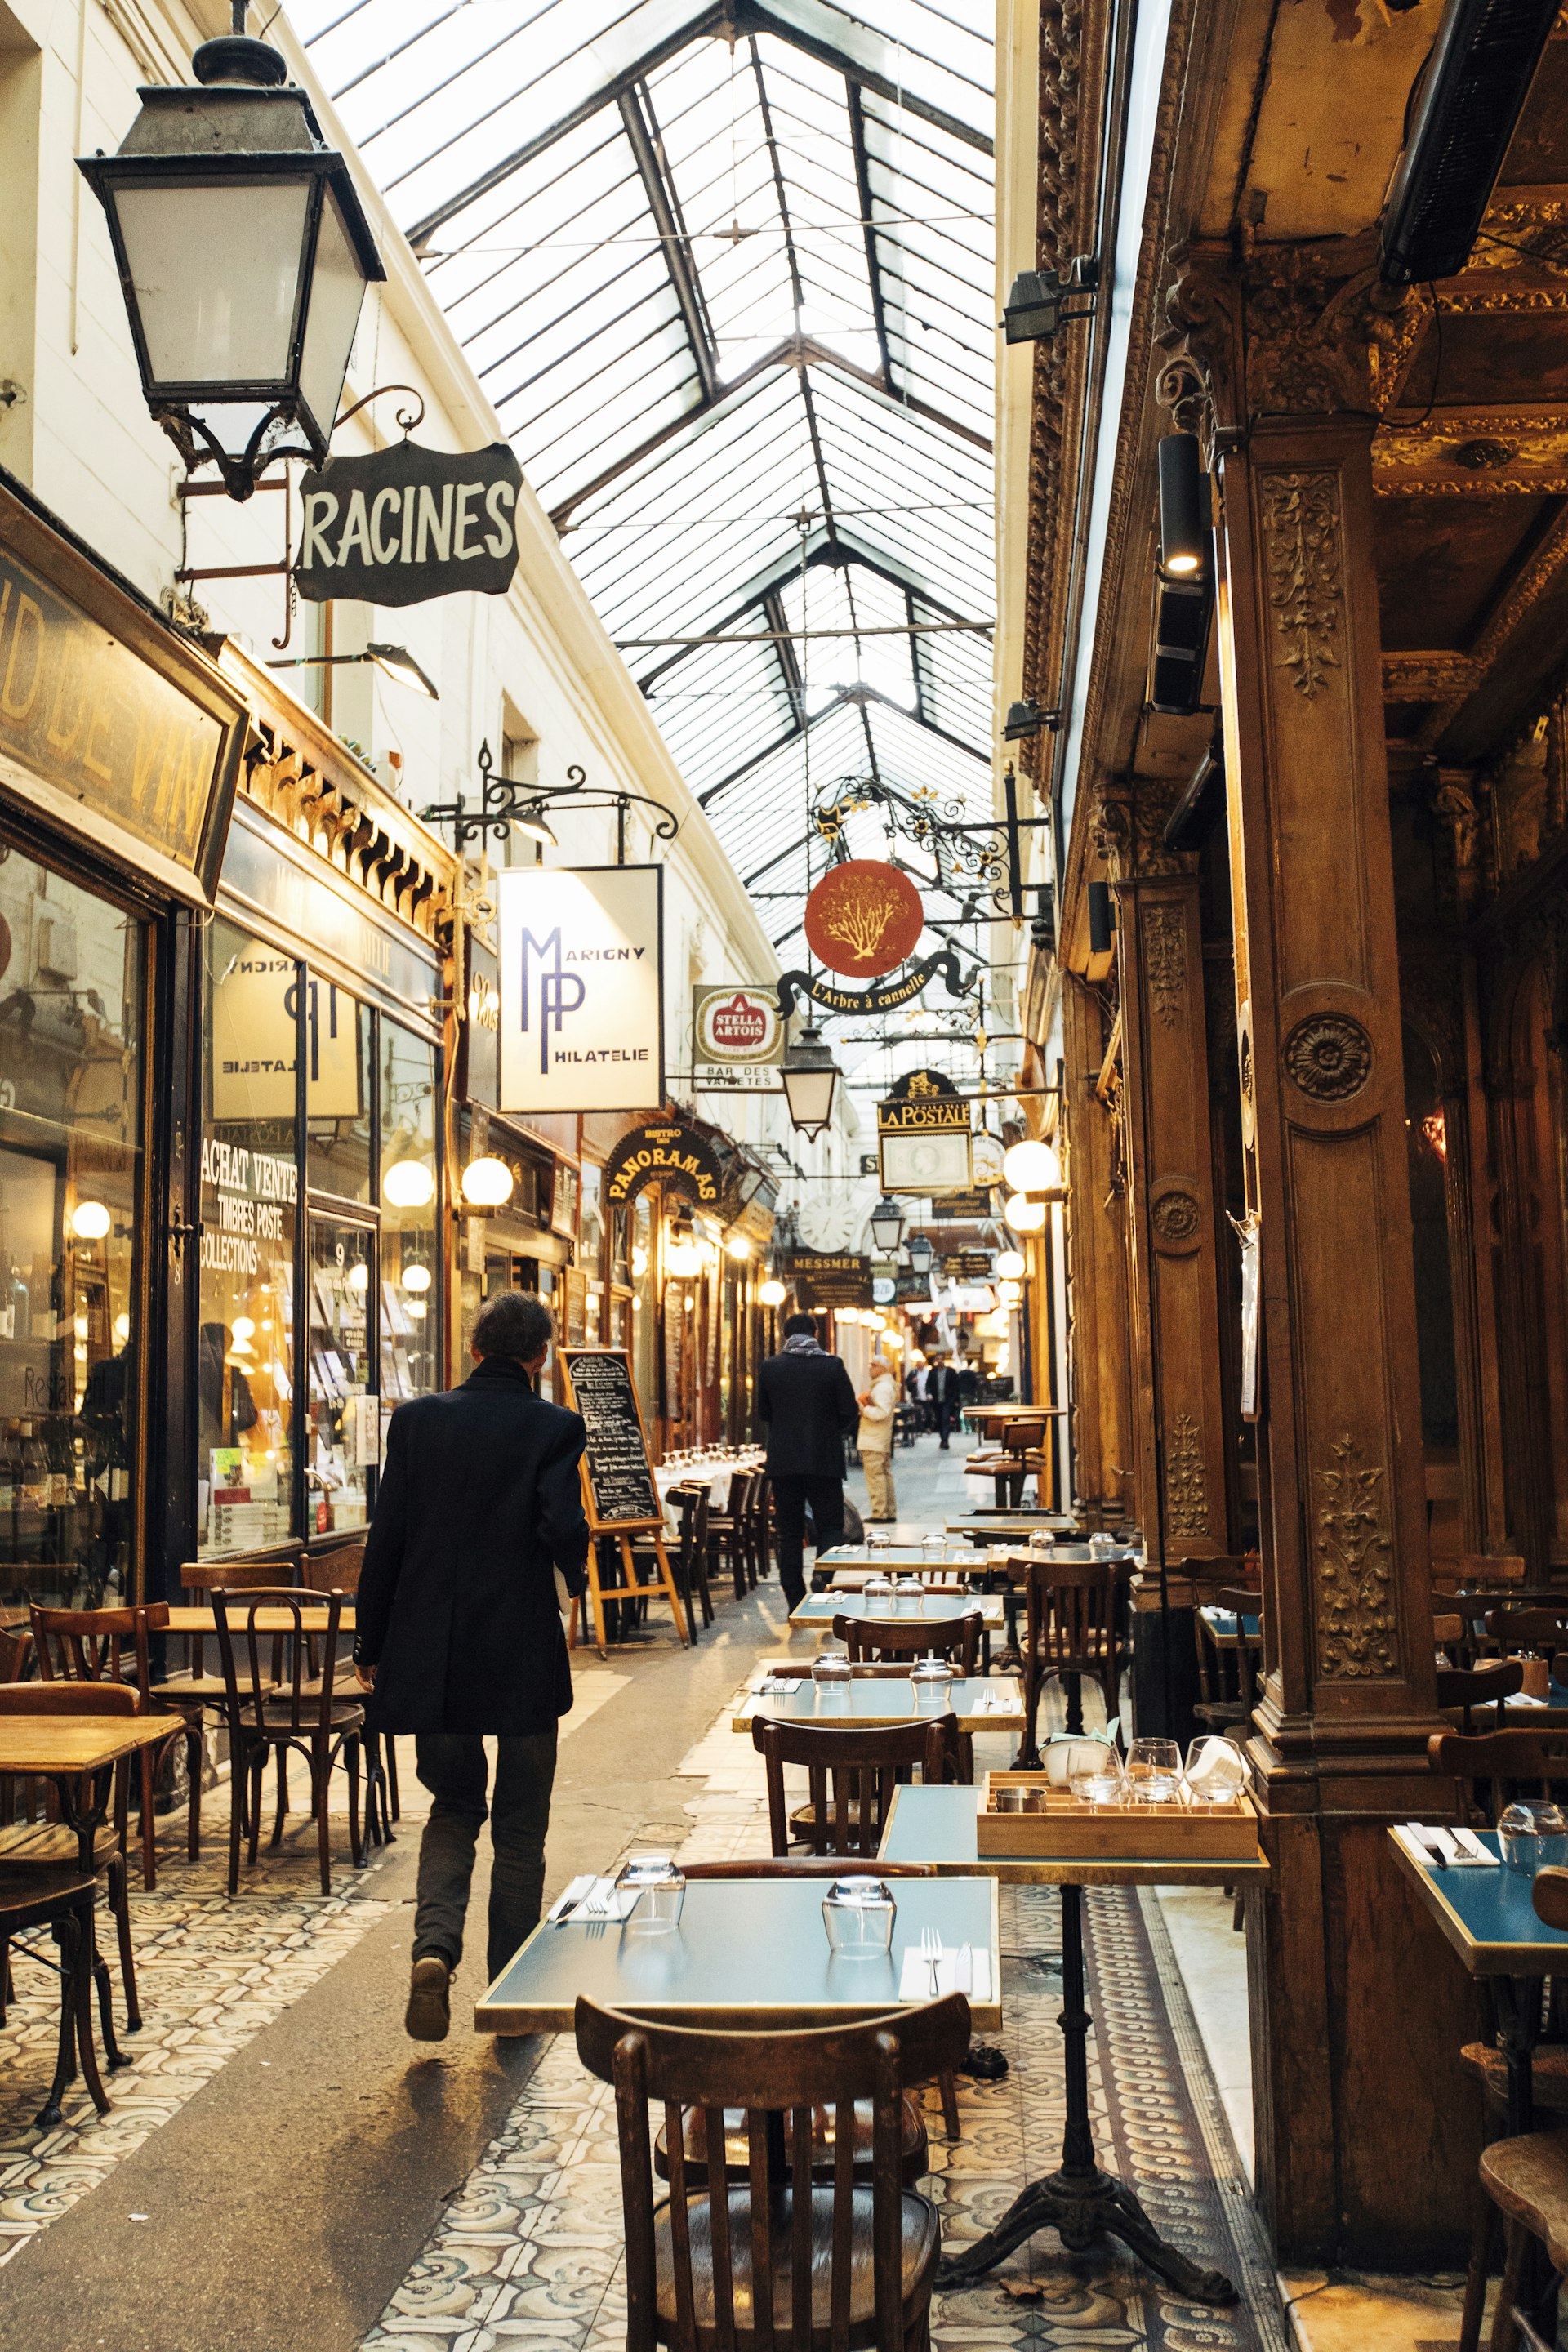 People walk through a narrow, glass-roofed passageway that is lined by restaurants and shops, some of which have dining tables outside.